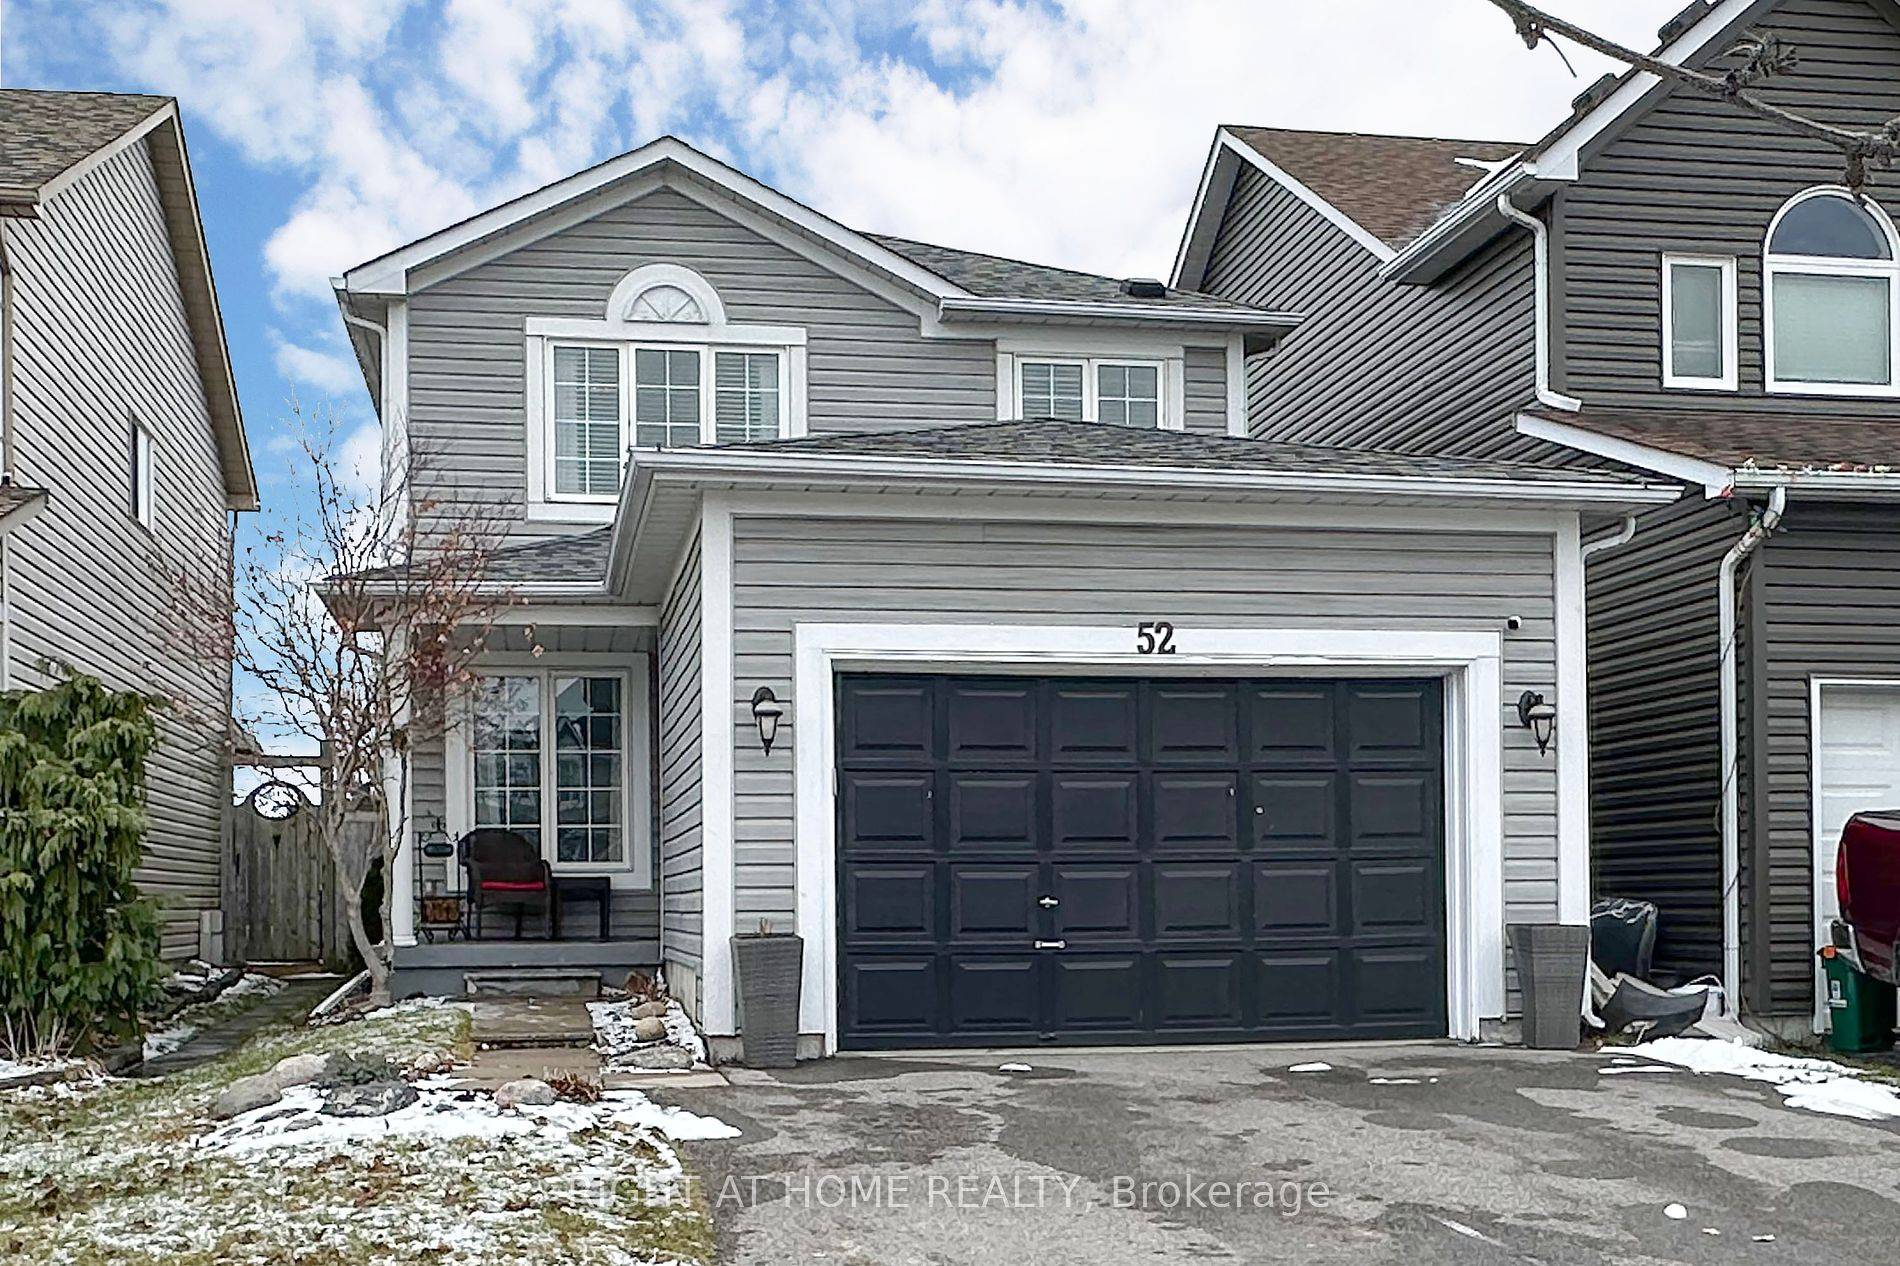 Offers Anytime ! Welcome to this wonderful two storey home nestled in the heart of a family friendly neighbourhood, offering an open concept main floor with living room, dining room ...